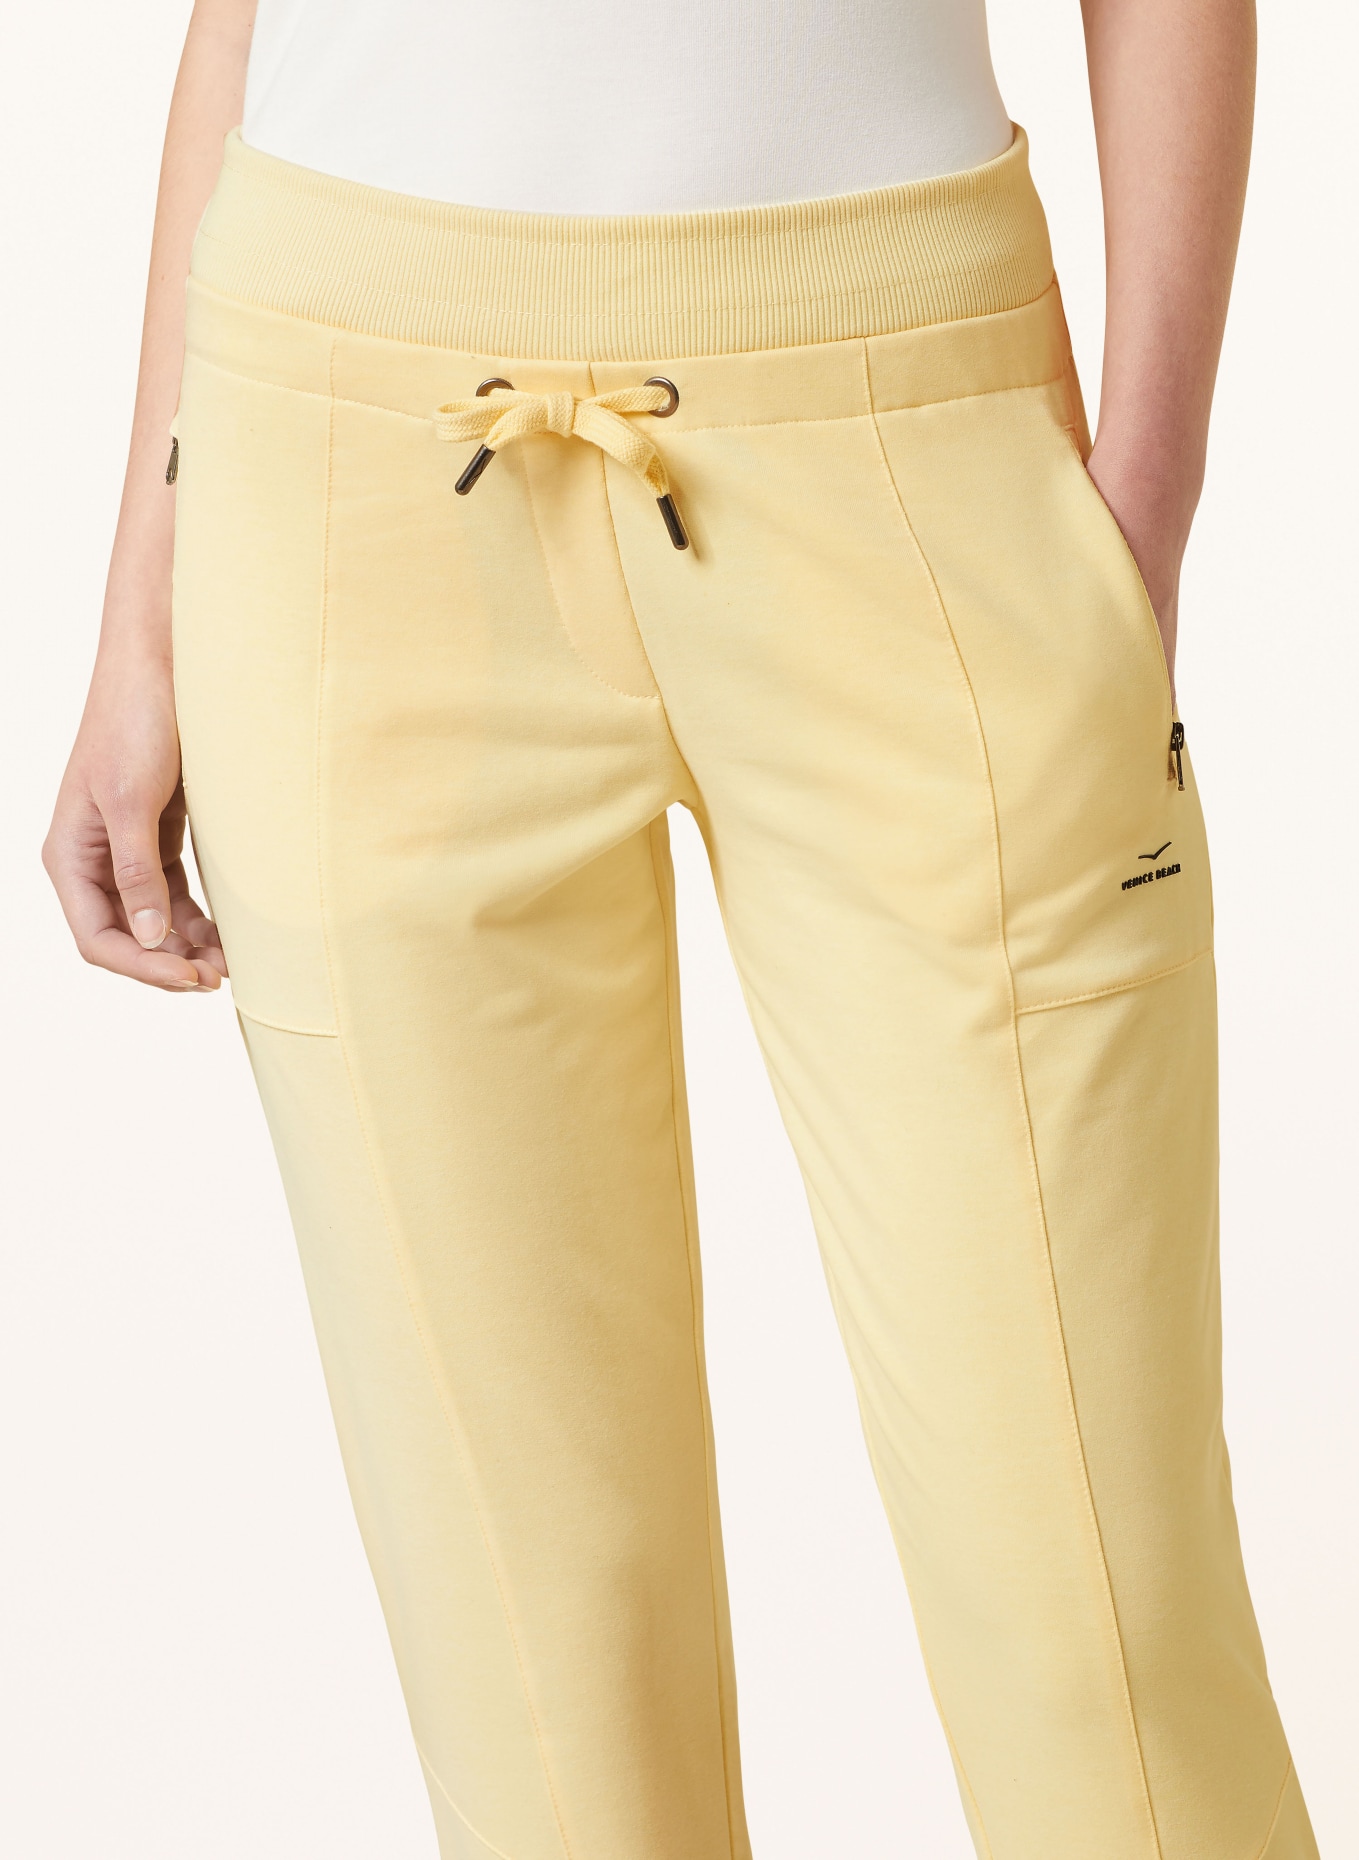 b.m.textile Skinny Fit Women Yellow Trousers - Buy b.m.textile Skinny Fit  Women Yellow Trousers Online at Best Prices in India | Flipkart.com